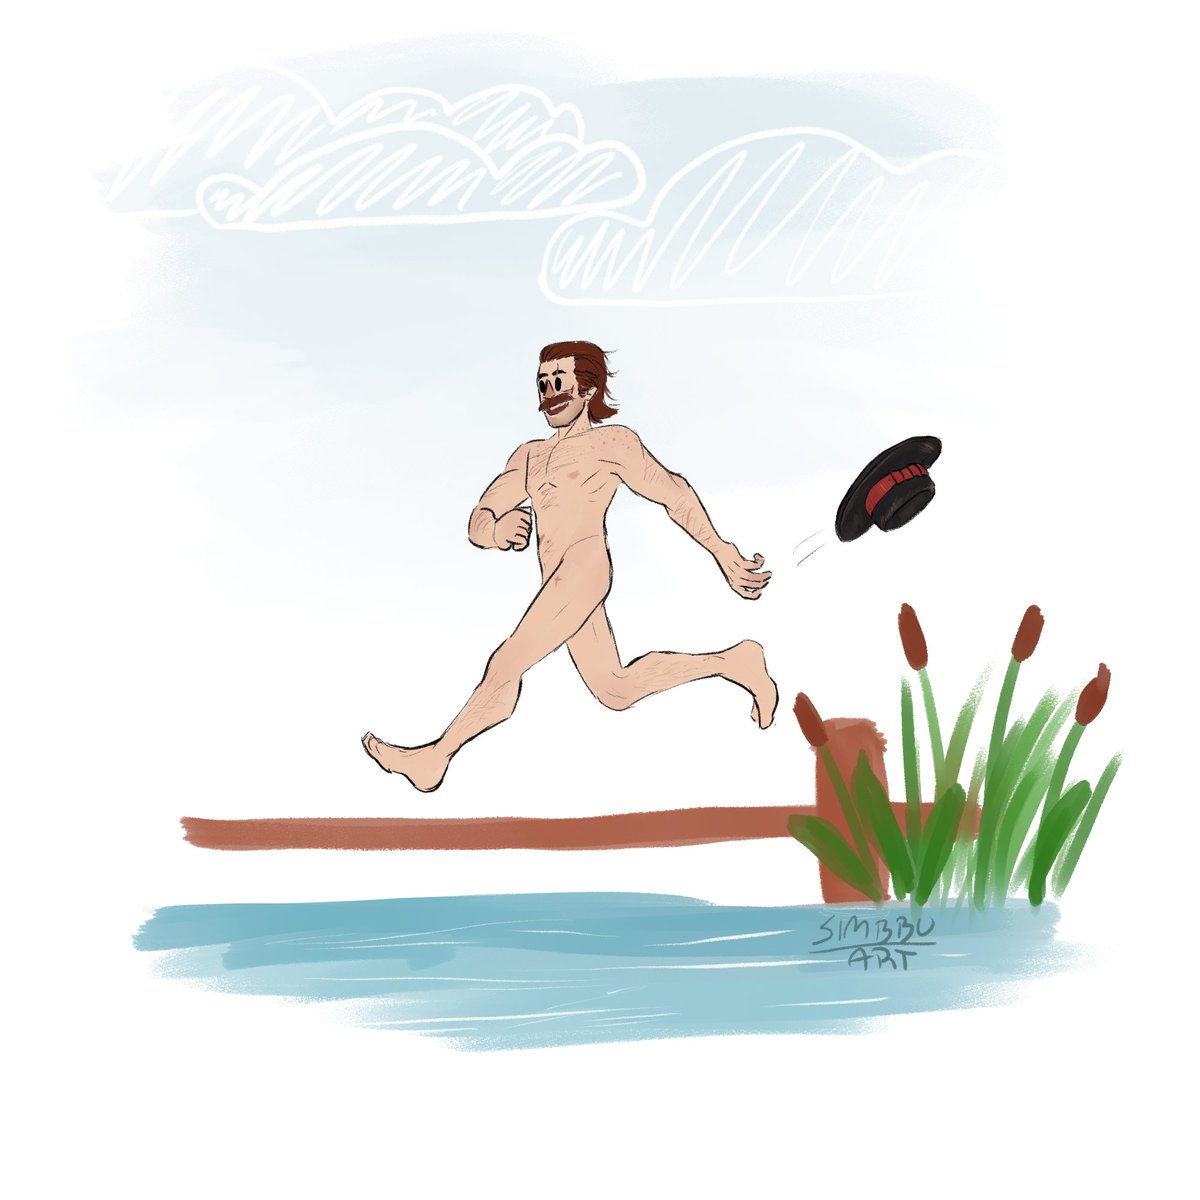 Arvo going for a skinny dip, cuz it's midsummer and it's time to have fun